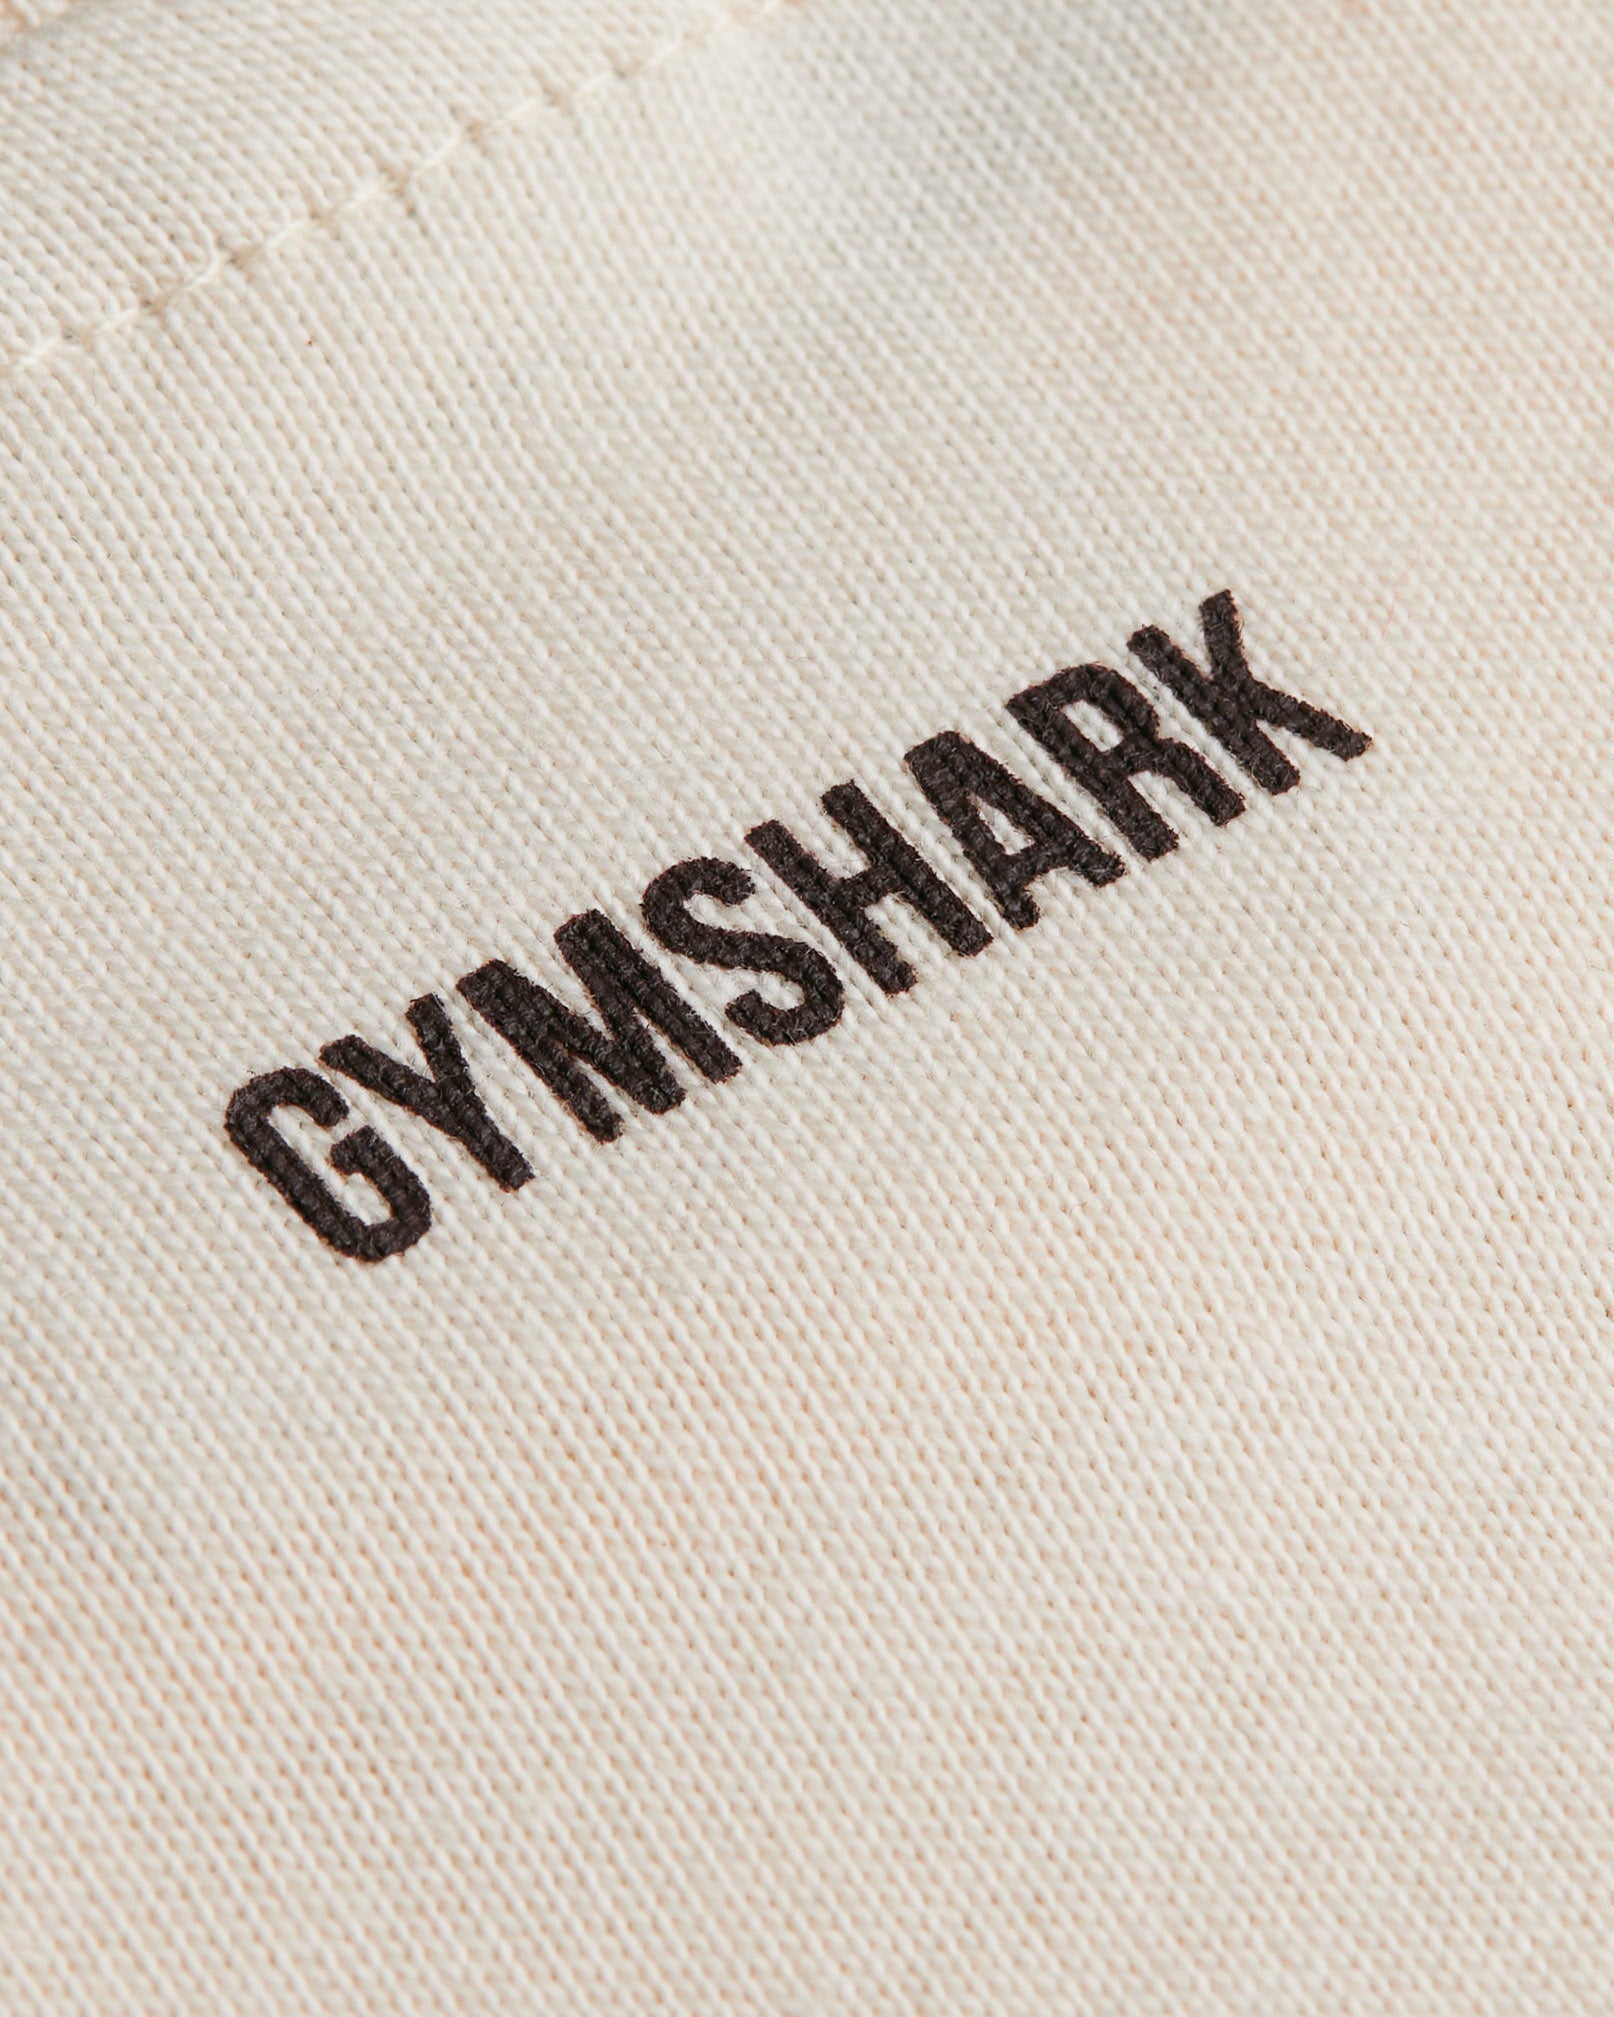 Phys Ed Graphic Sweatpants in Ecru White/Archive Brown - view 6